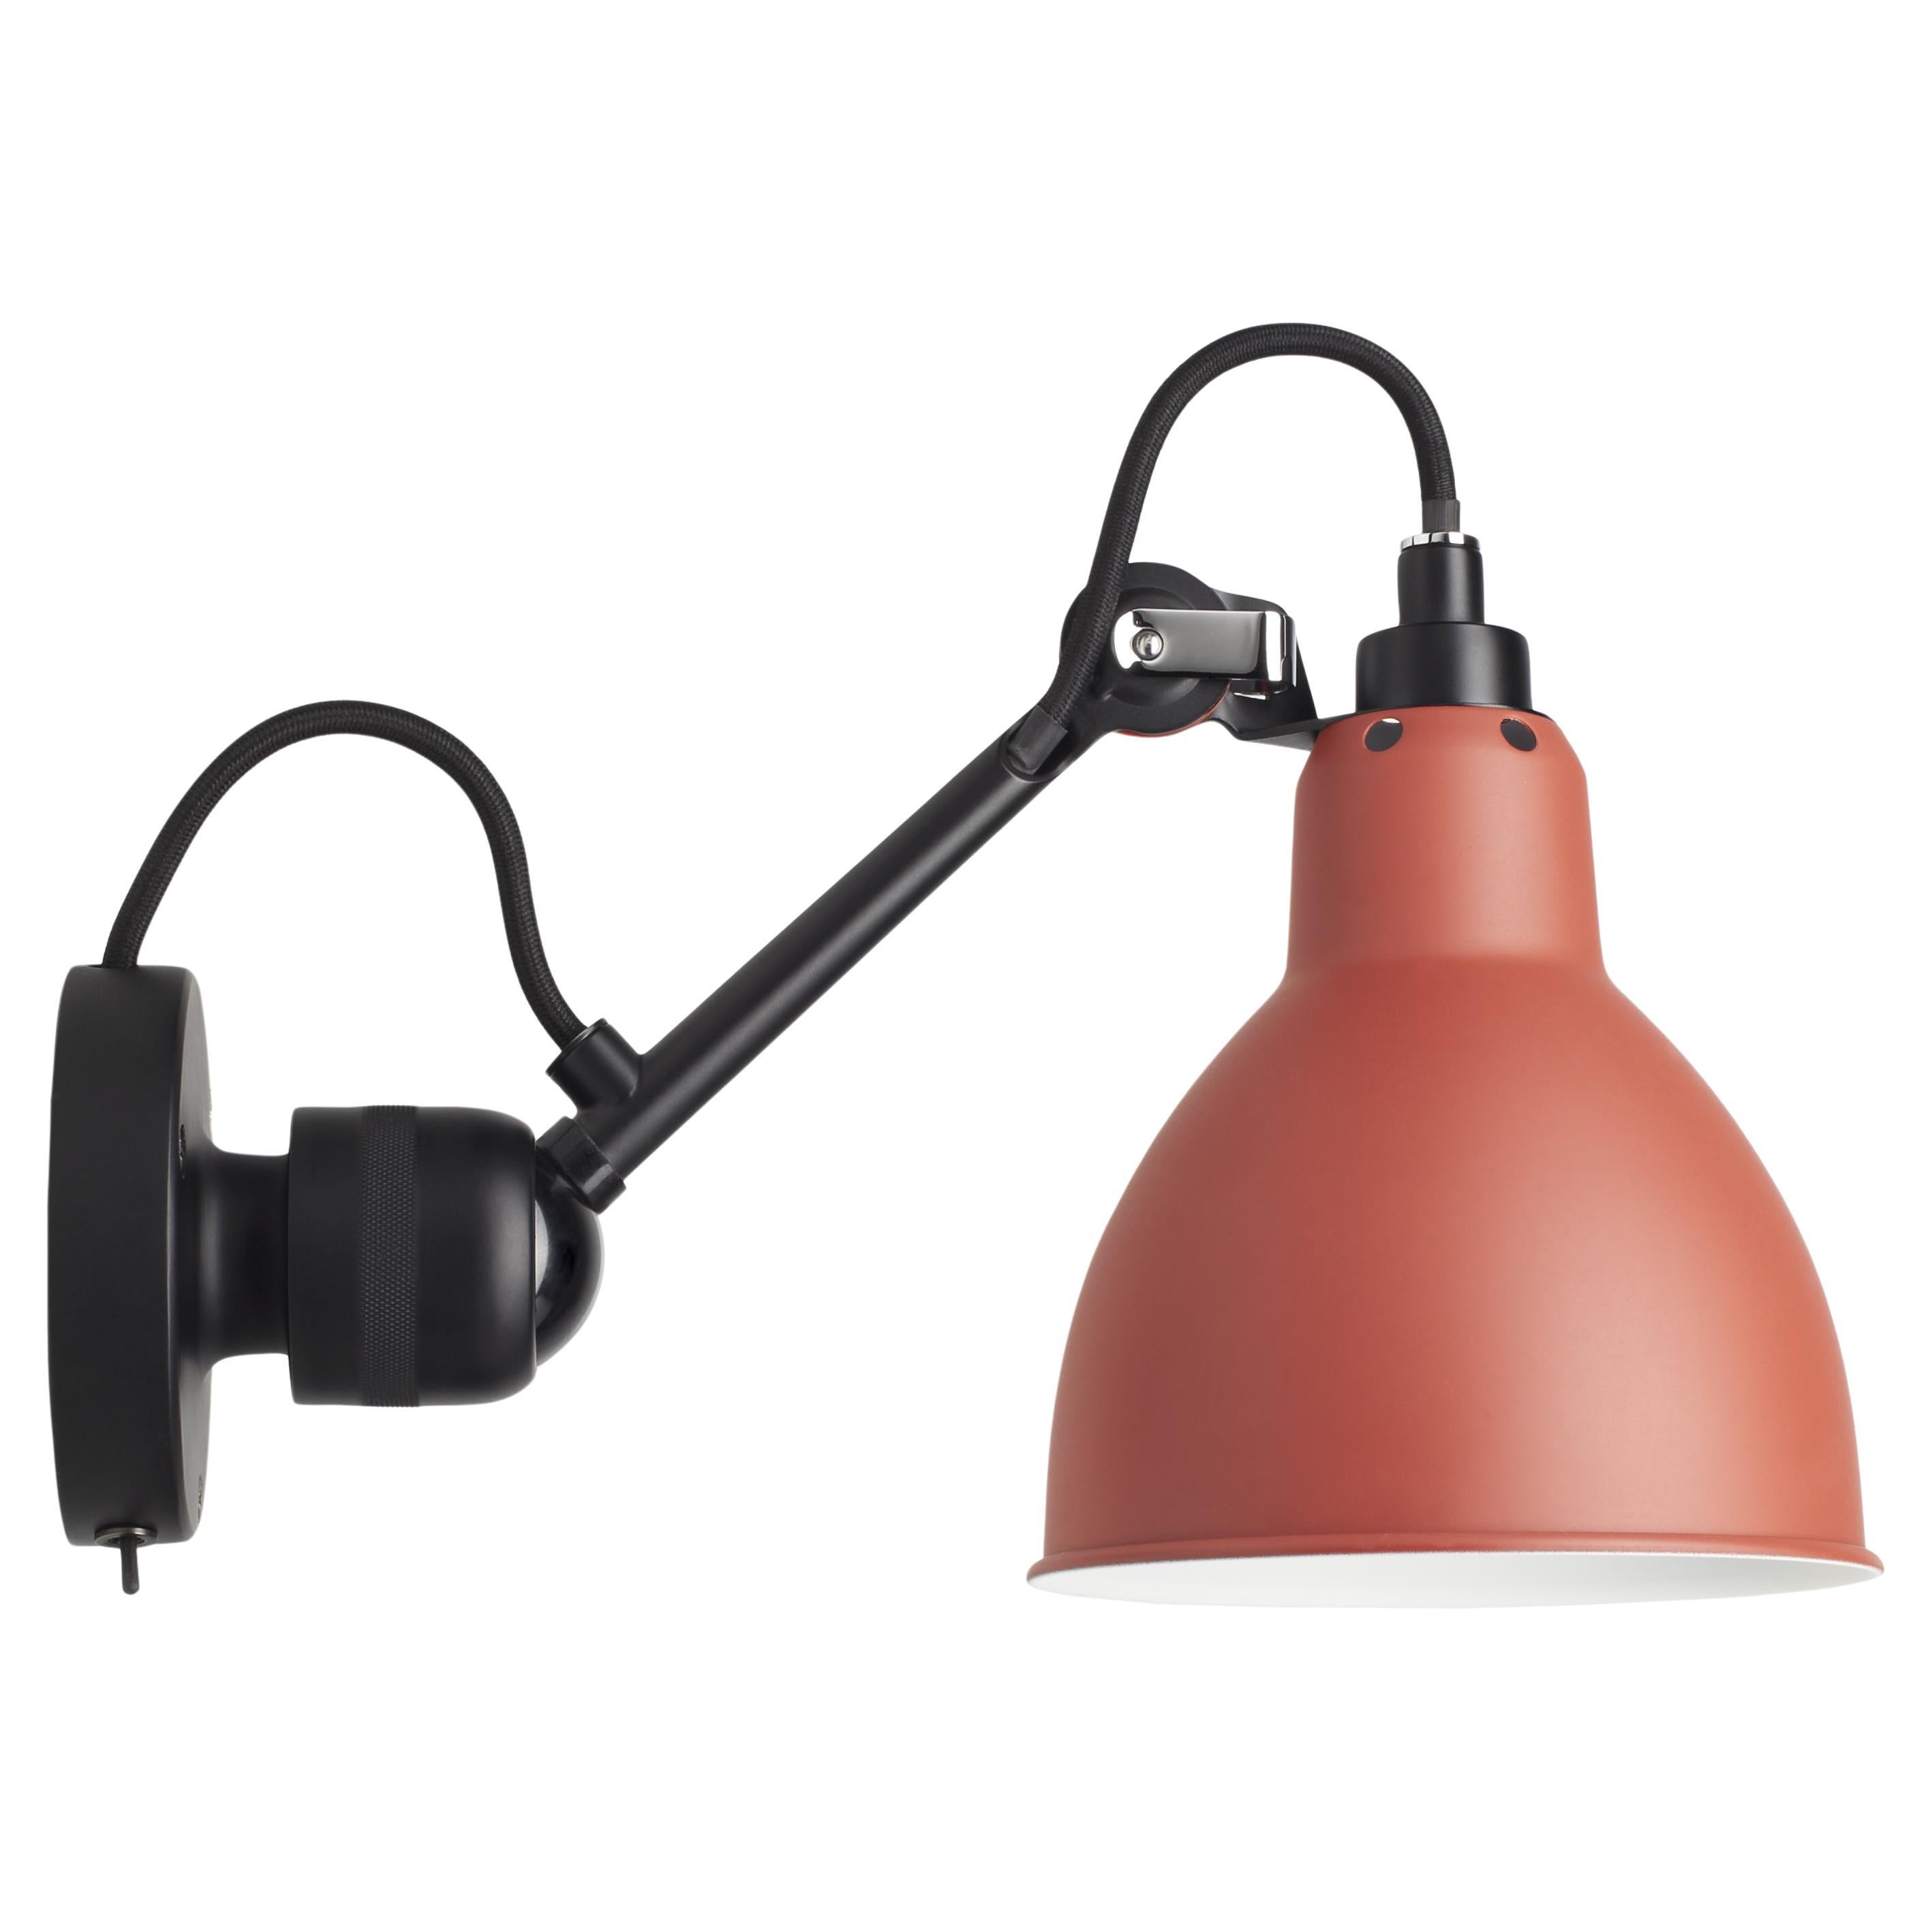 DCW Editions La Lampe Gras N°304 SW Wall Lamp in Black Arm and Red Shade